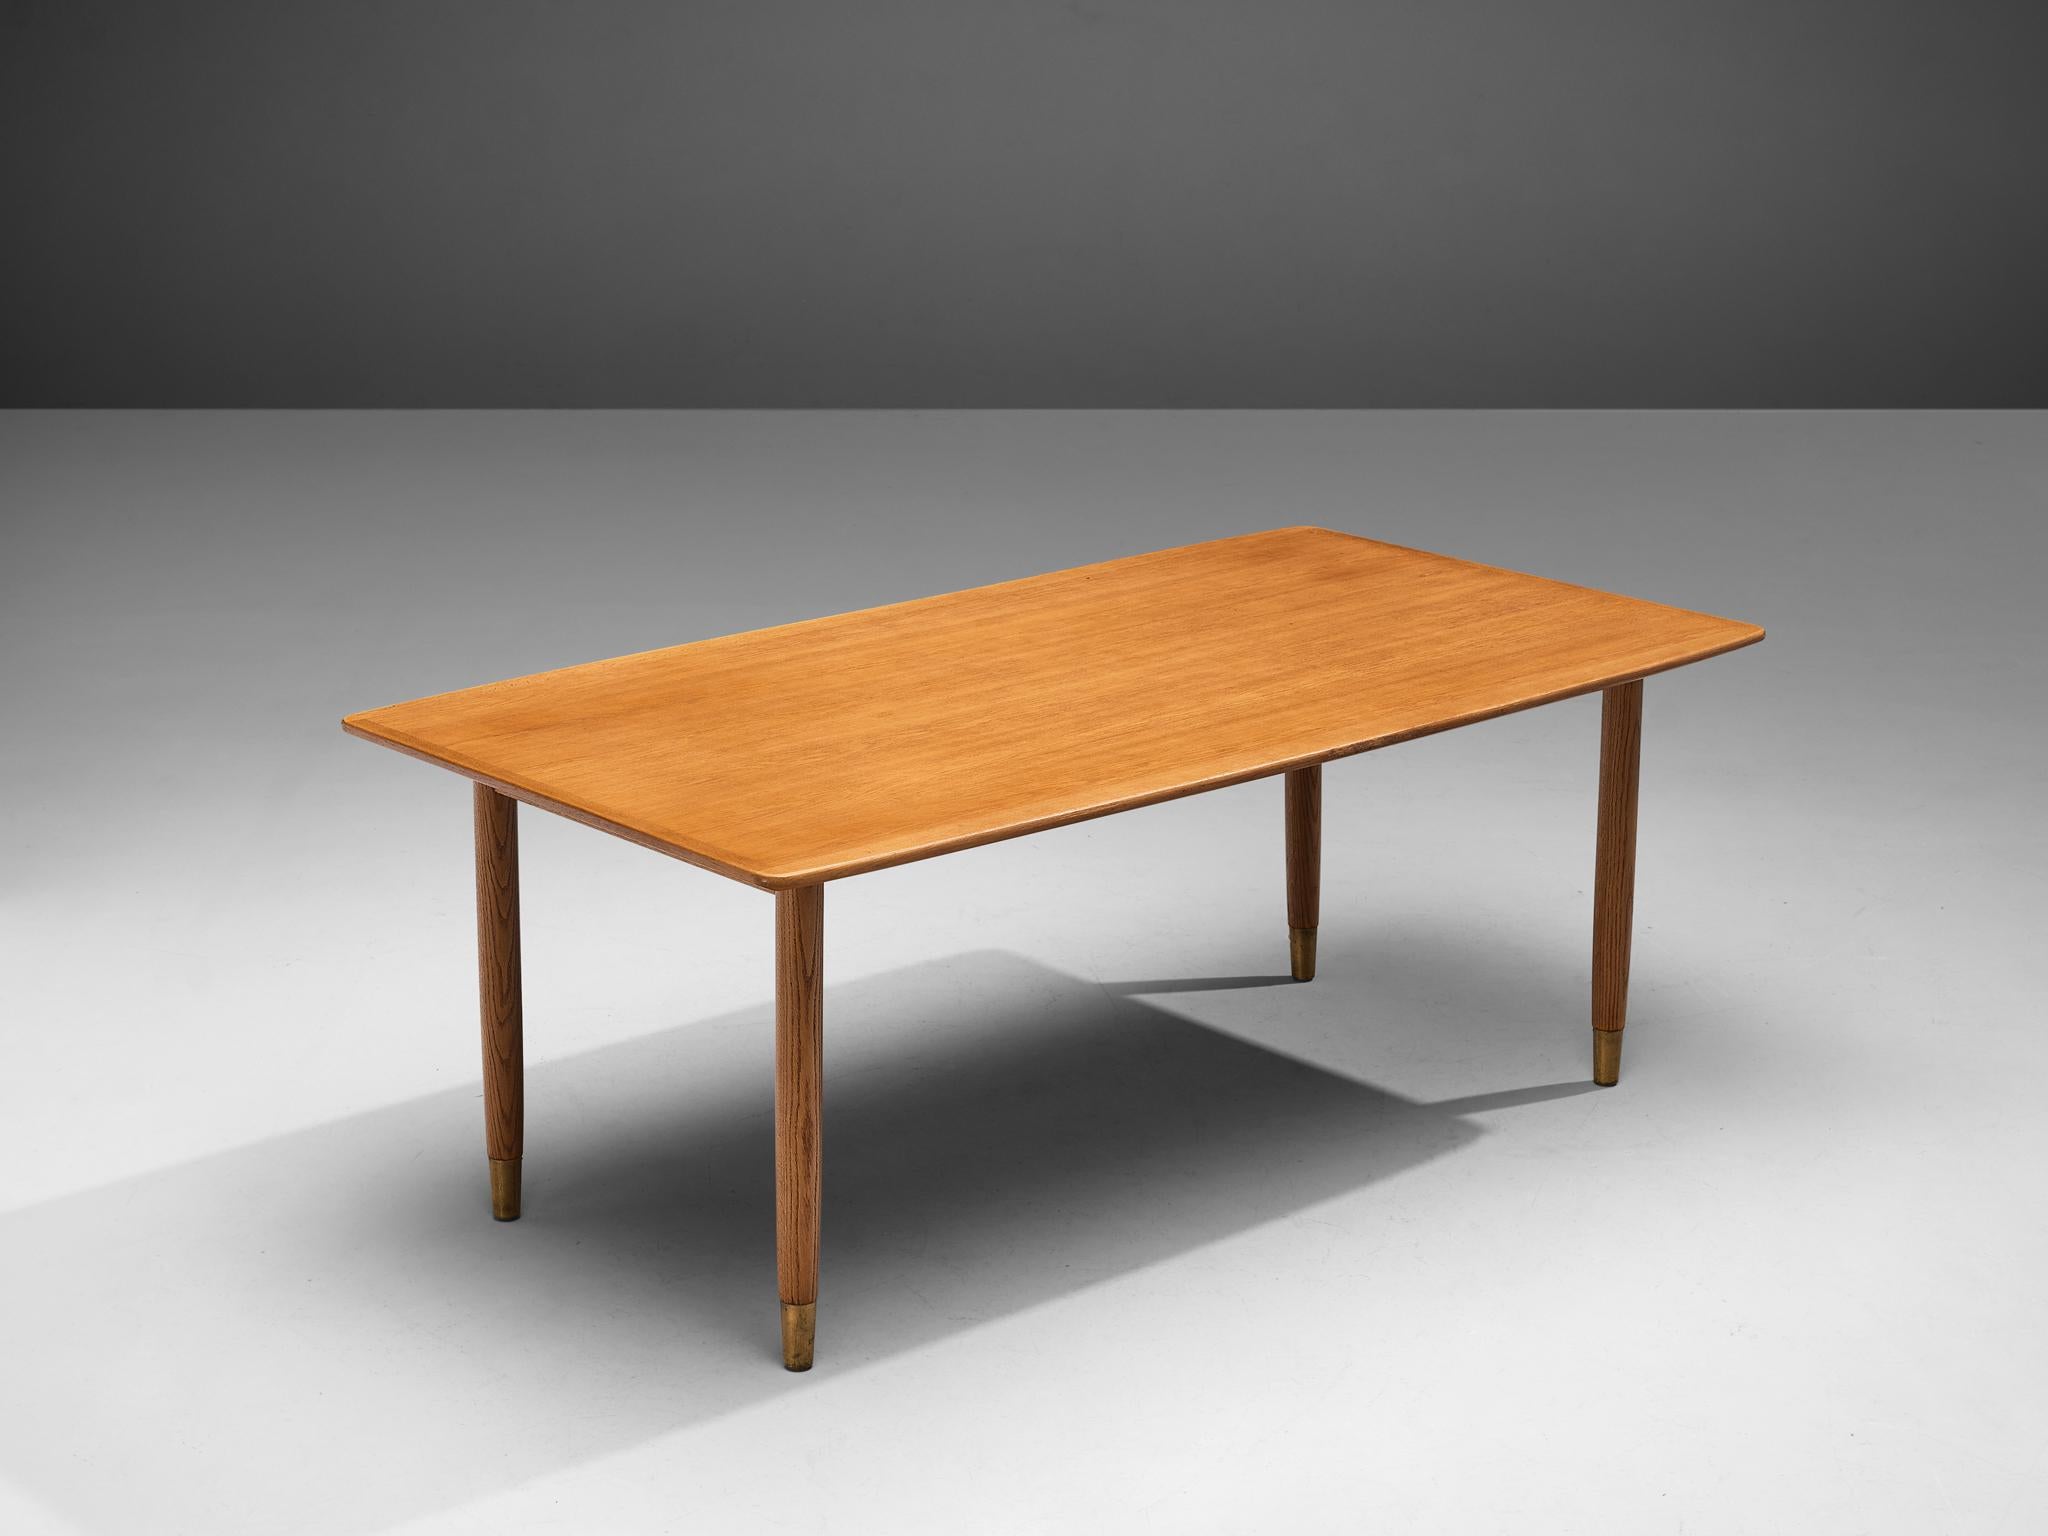 Dining table, oak, brass, Denmark, 1950s

Scandinavian Modern dining table with rectangular top. The warm colored top rests on four circular, tapered legs that have brass feet. This detail gives the design strength and characterizes this table.
 